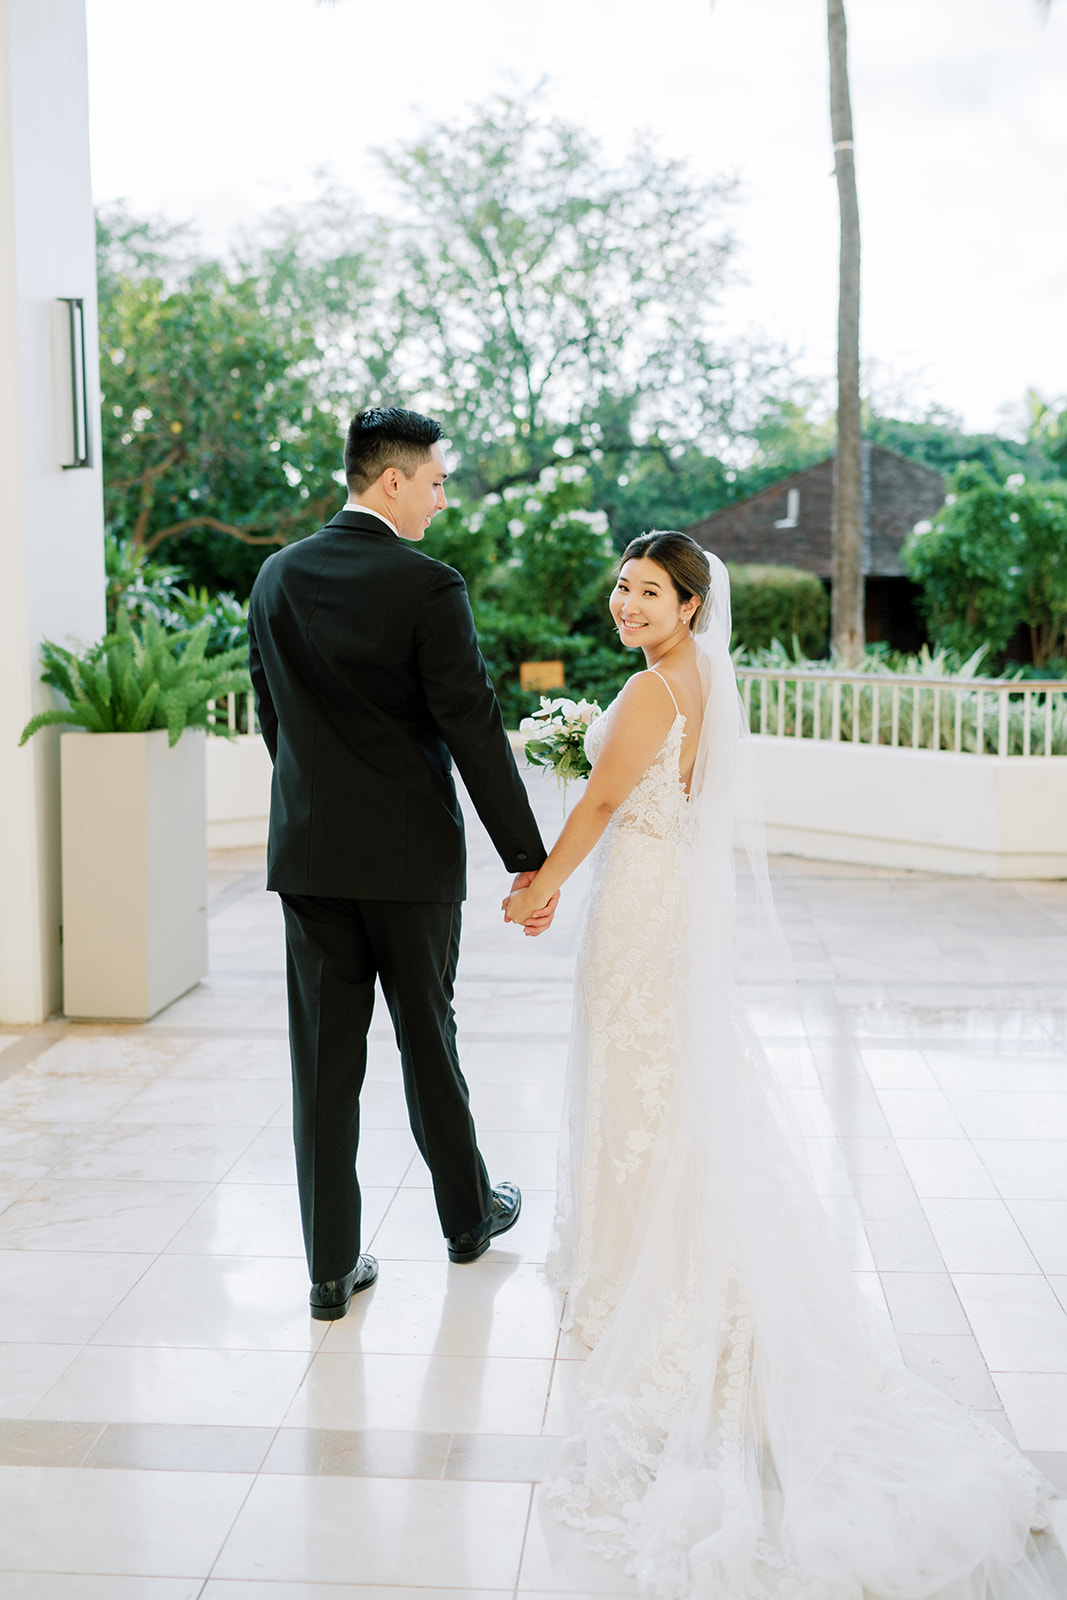 A bride and groom walking away from Megan Moura in the lobby of a hotel.